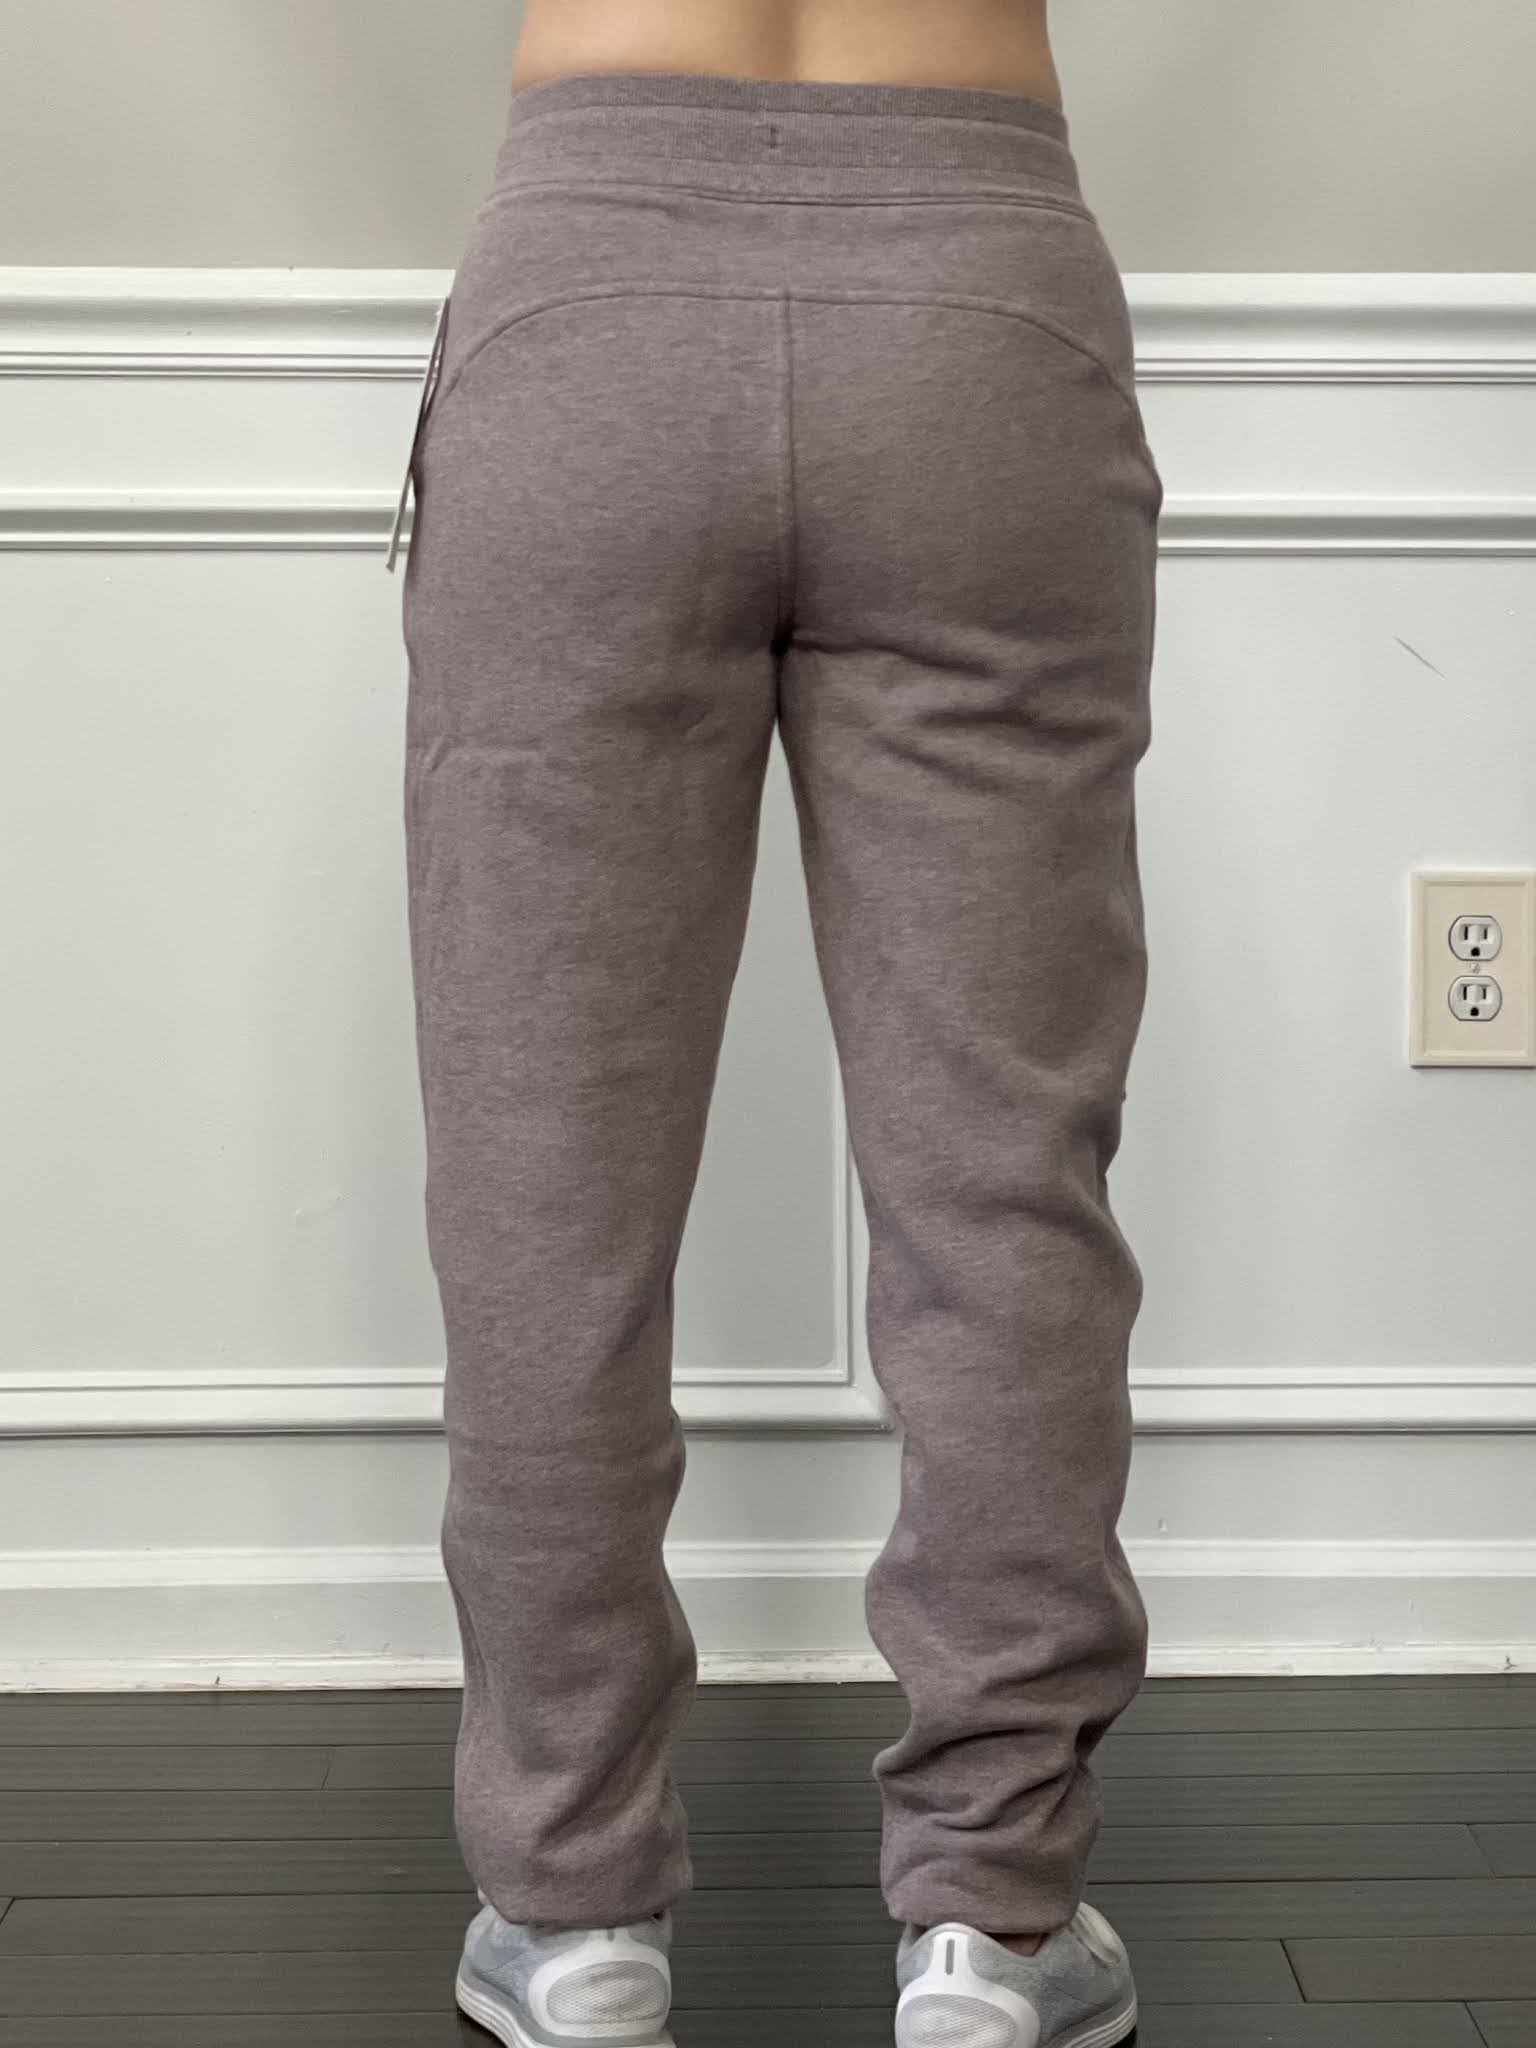 Officially switching my scuba joggers to the loungeful! Details in comments  : r/lululemon